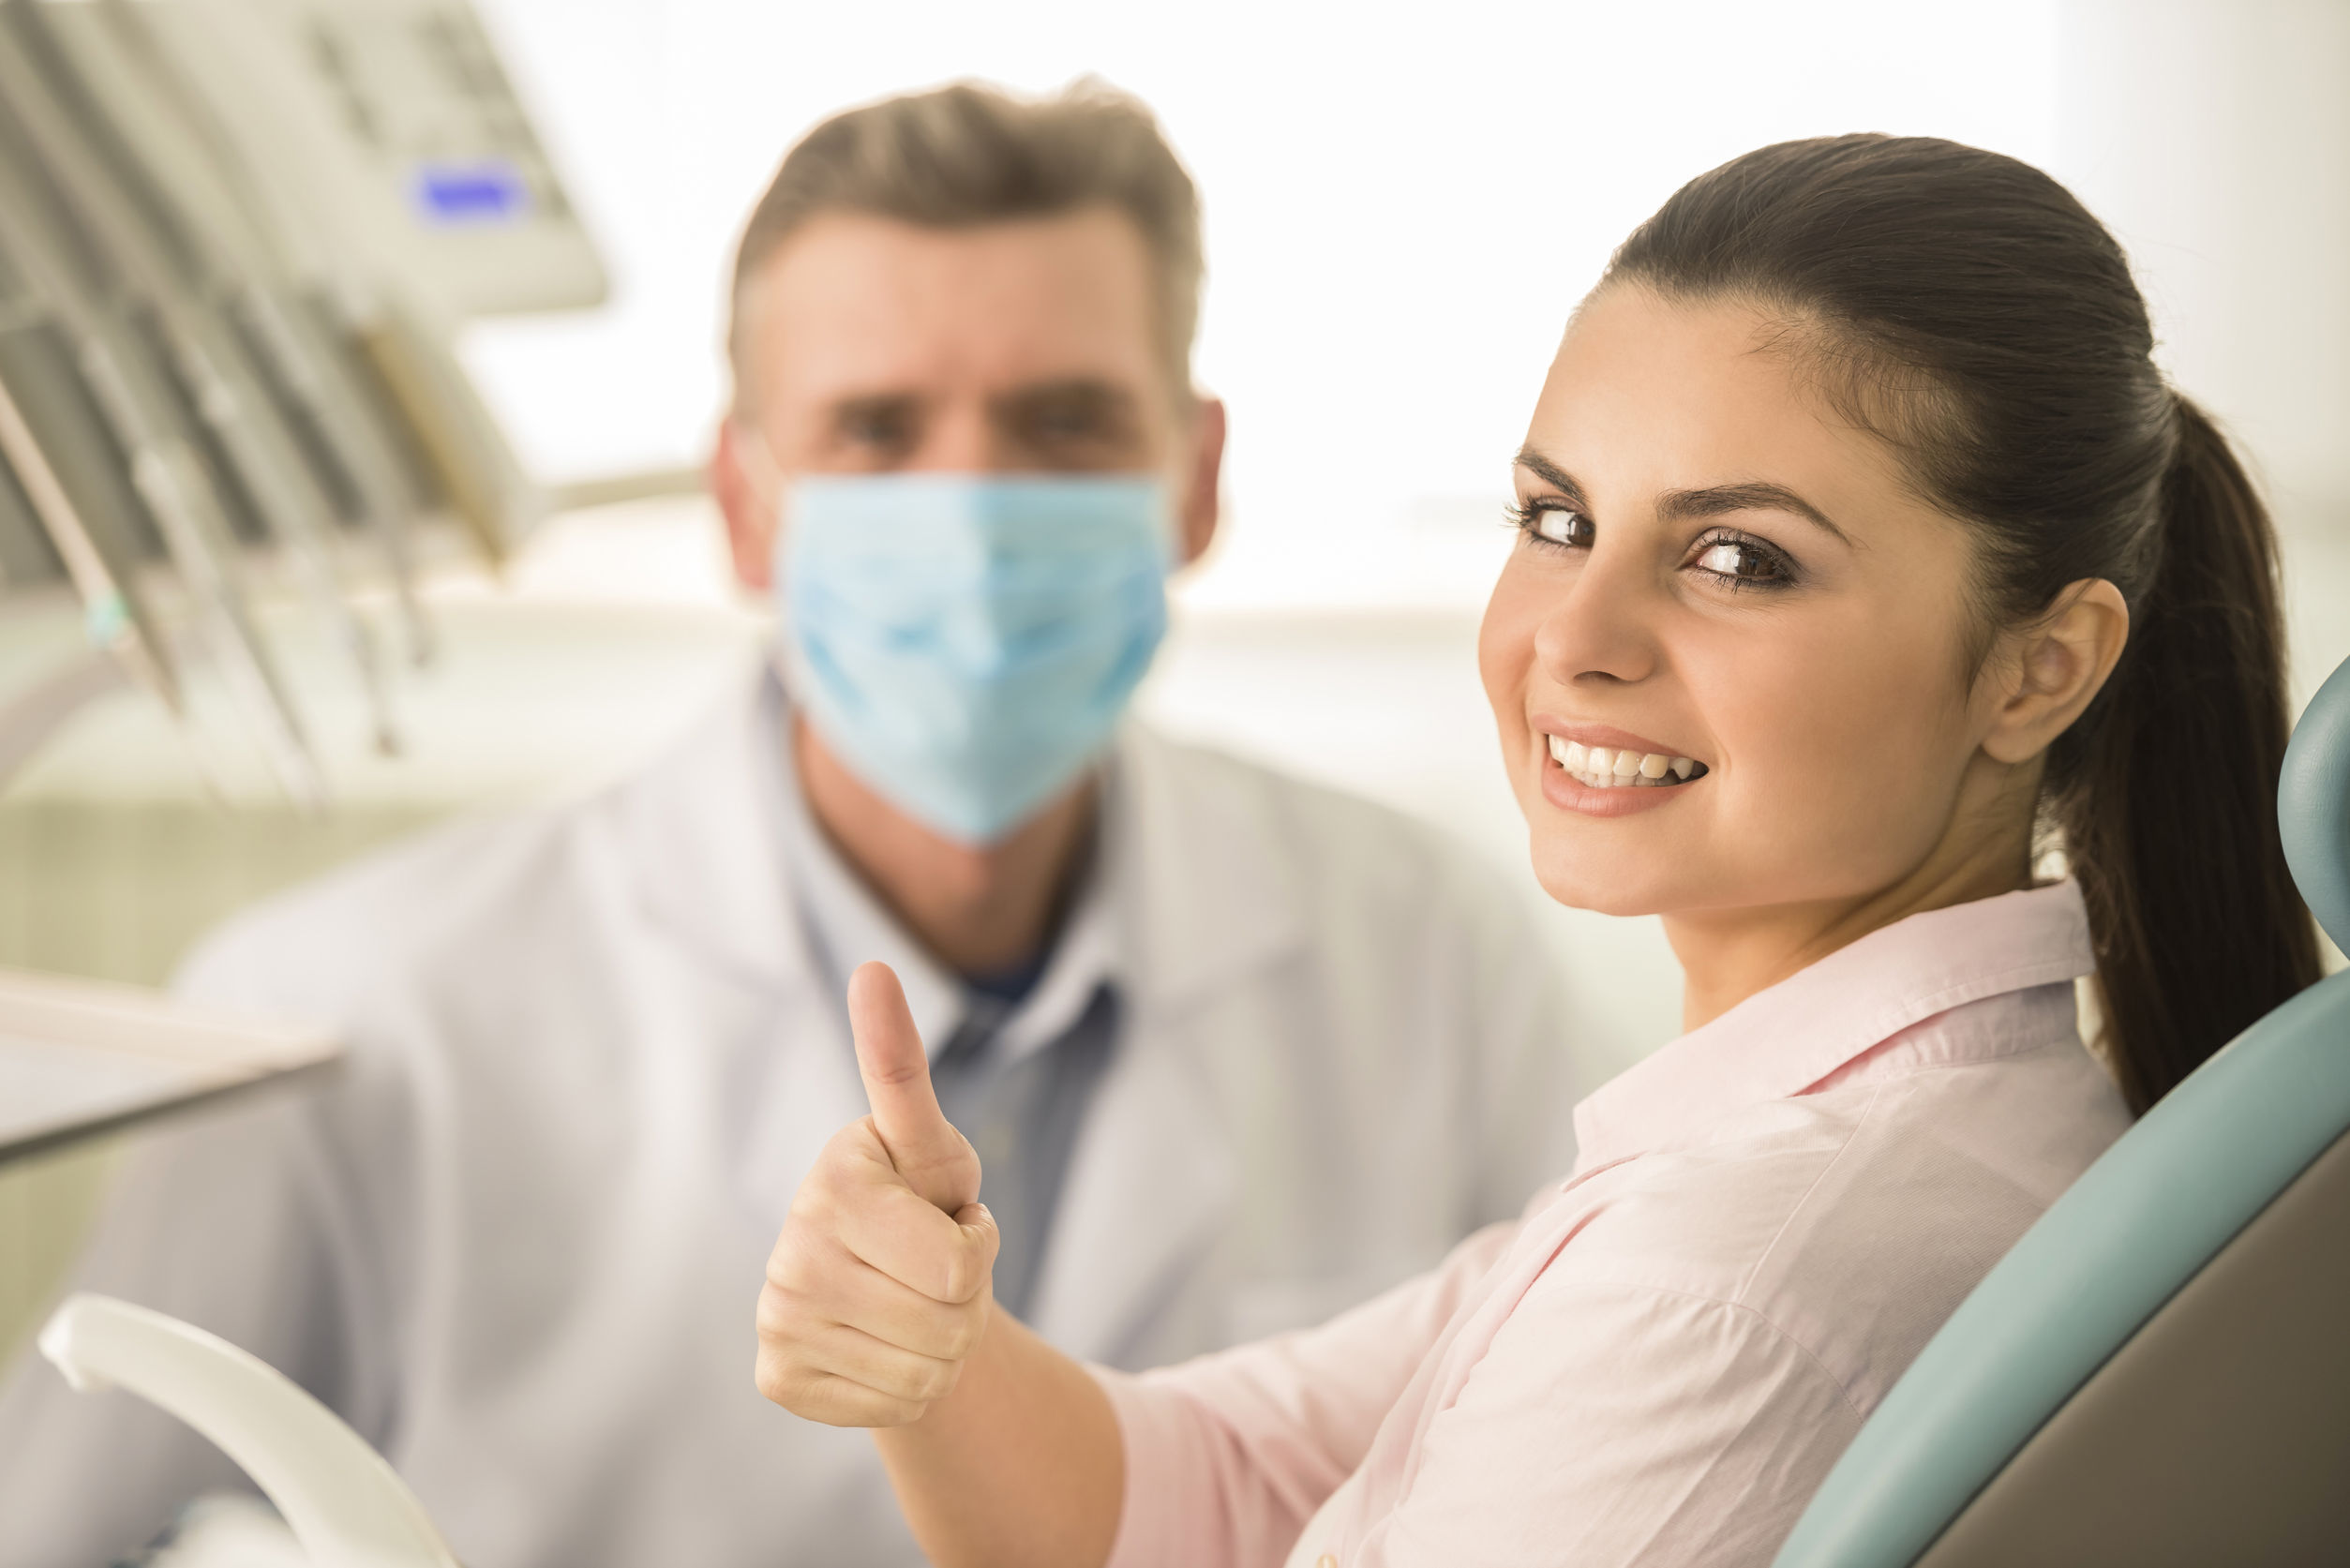 Female Patient Smiling in Dental Office